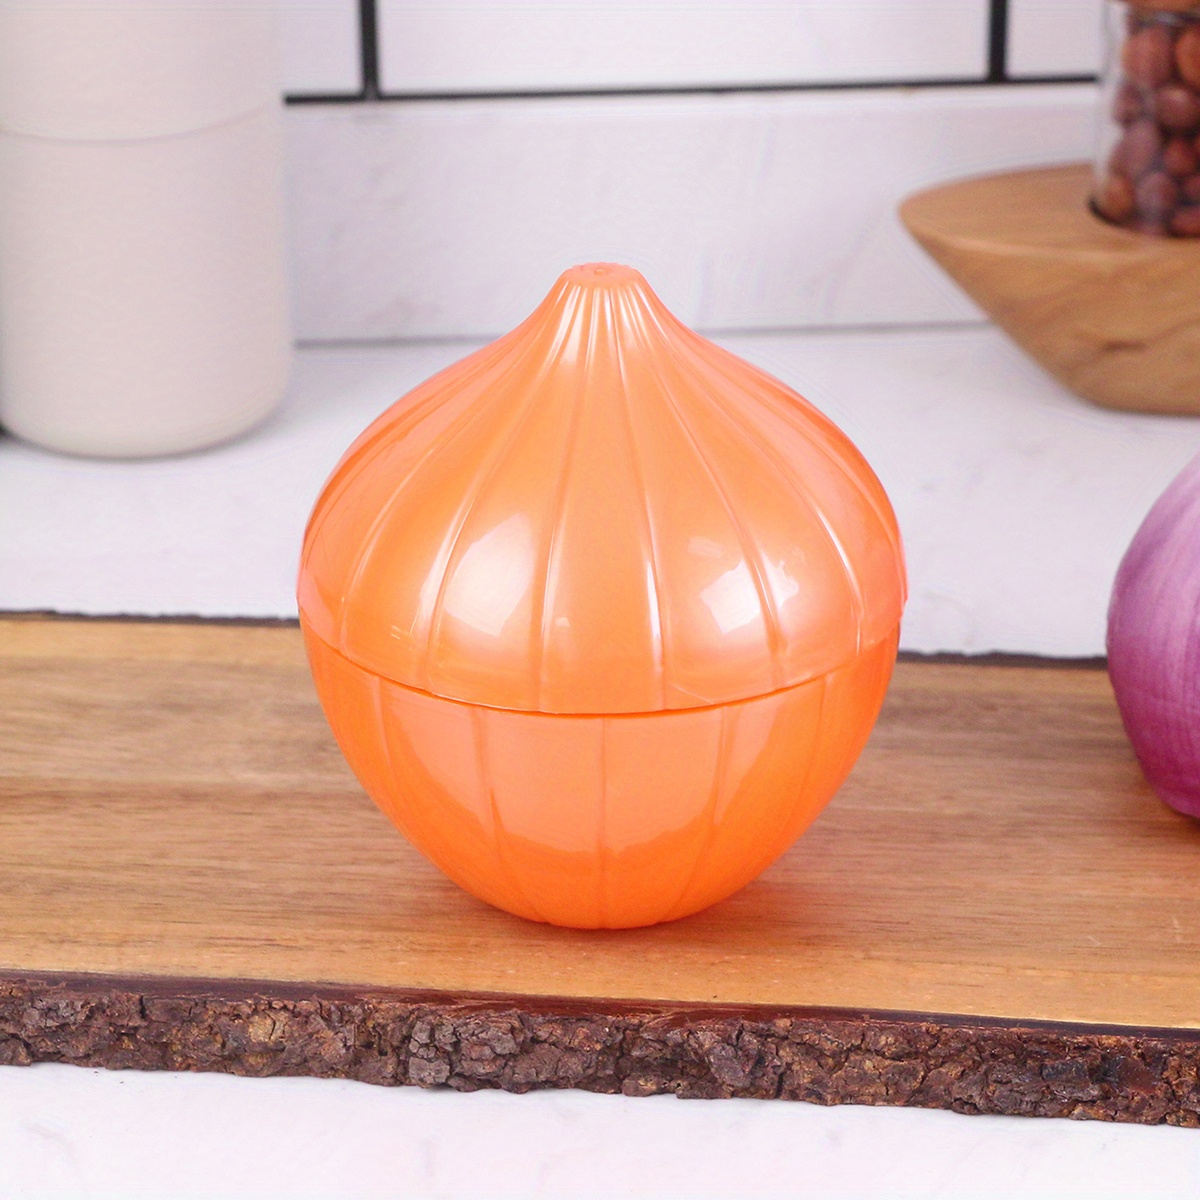 Onion Storage Containers, Reusable Onion Keeper for Refrigerator,  Individual Onion Saver Holder Organizer for Fridge to Keep Onion Fresh